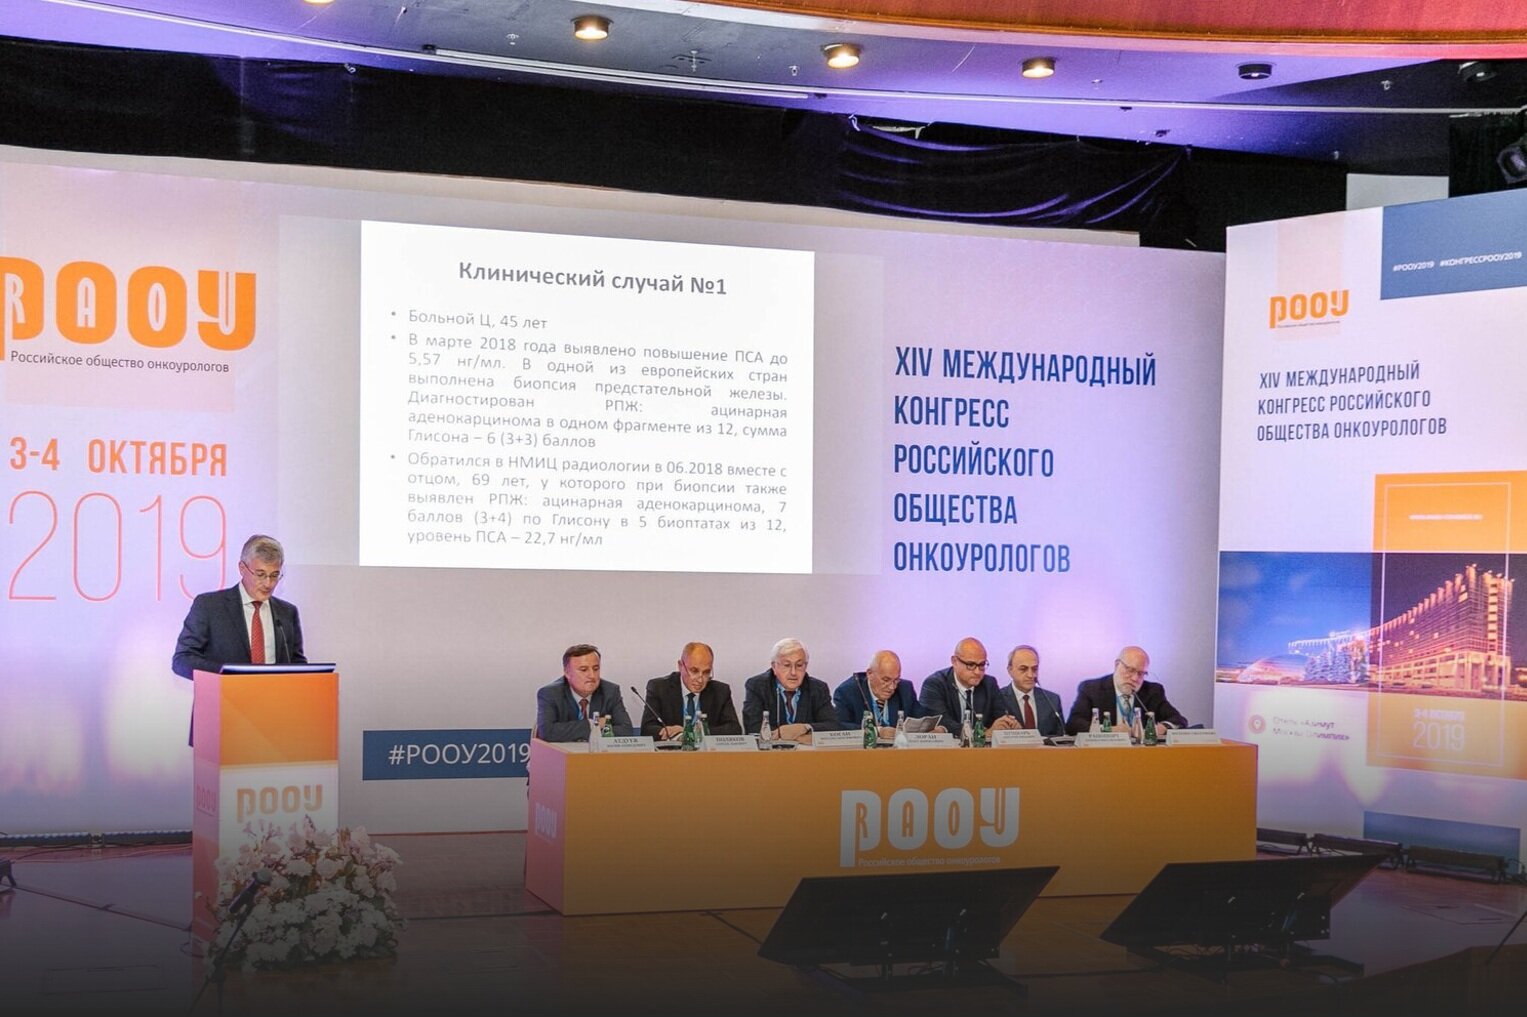 2019: Russian OncoUrological Association hosts AECA coordinating center experts from Fox Chase Cancer Center at the Annual Congress in Moscow, Russia 